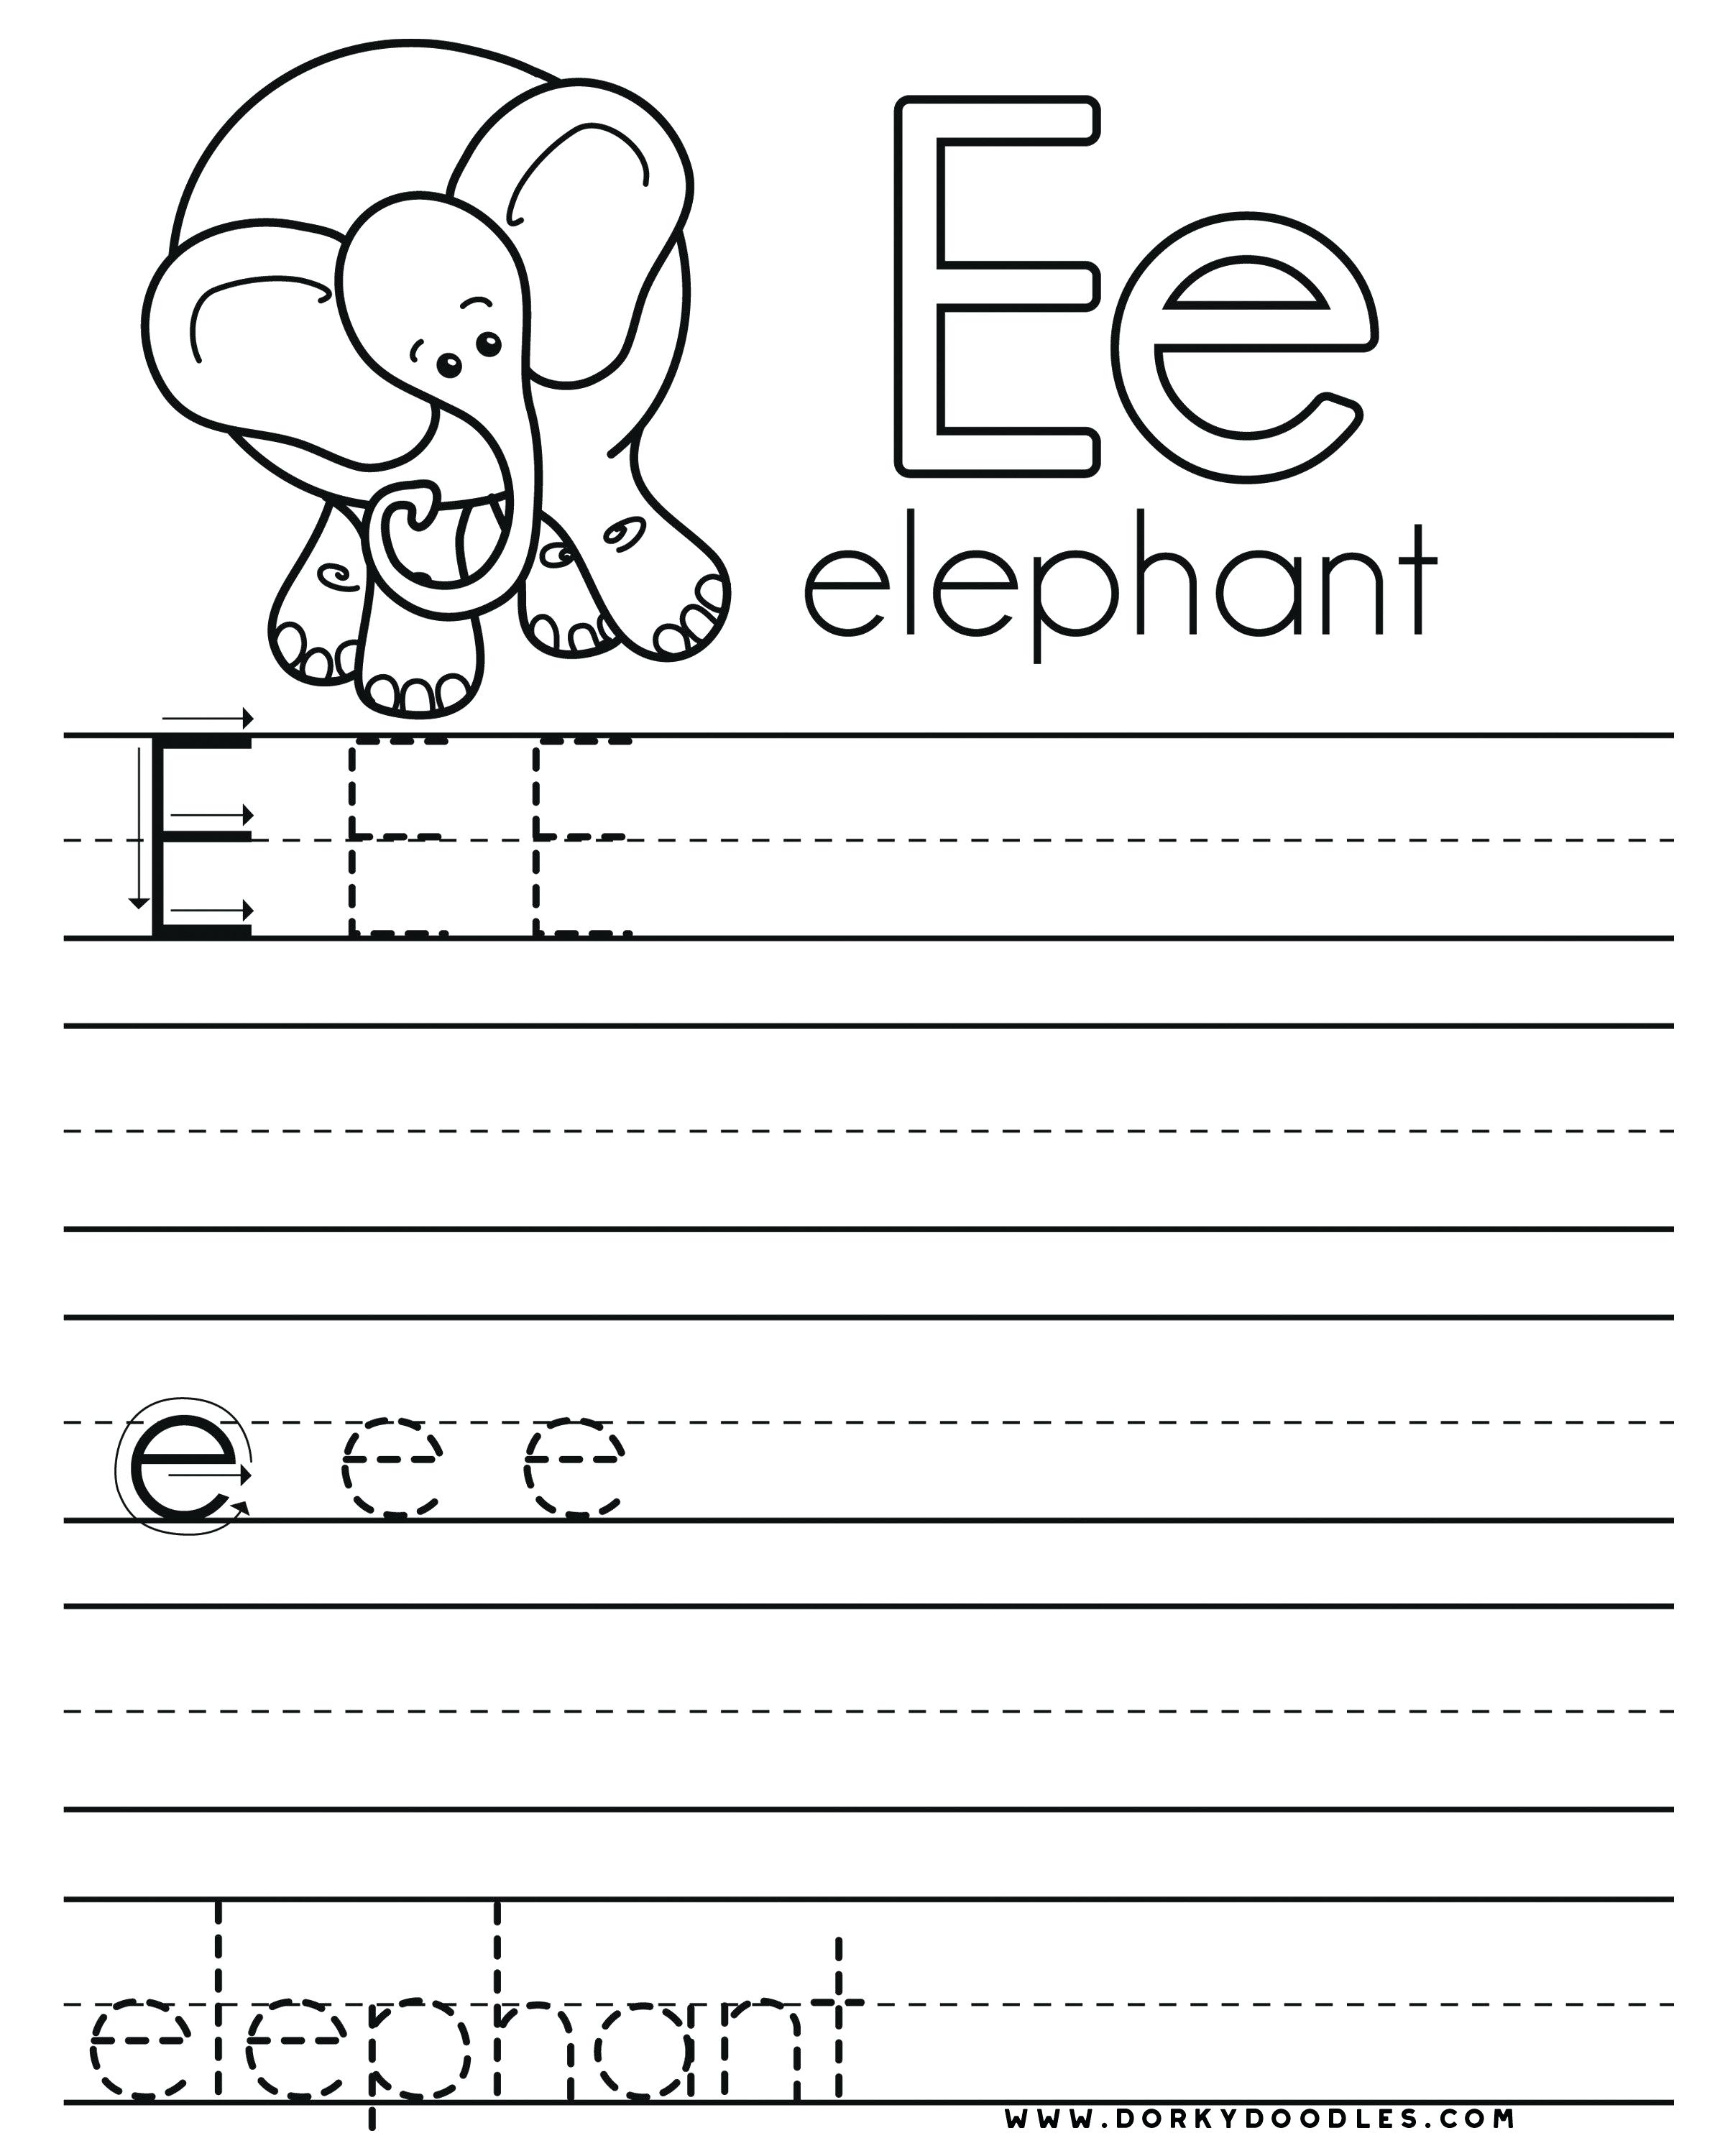 Practice Writing The Letter E Coloring Page Letter E Worksheets 